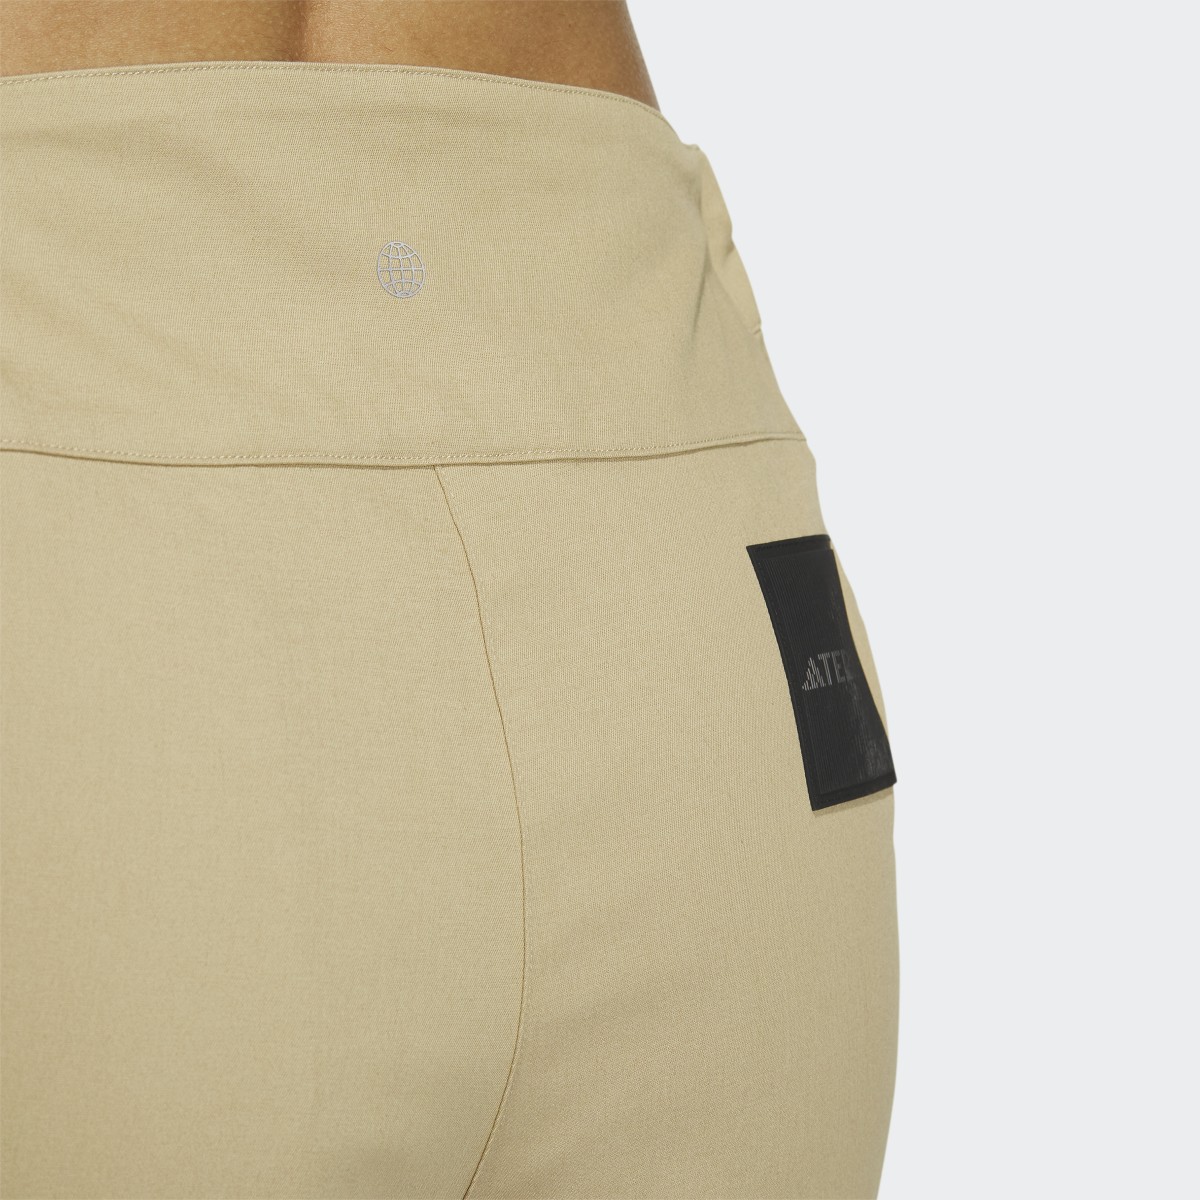 Adidas National Geographic Twill Trousers. 7